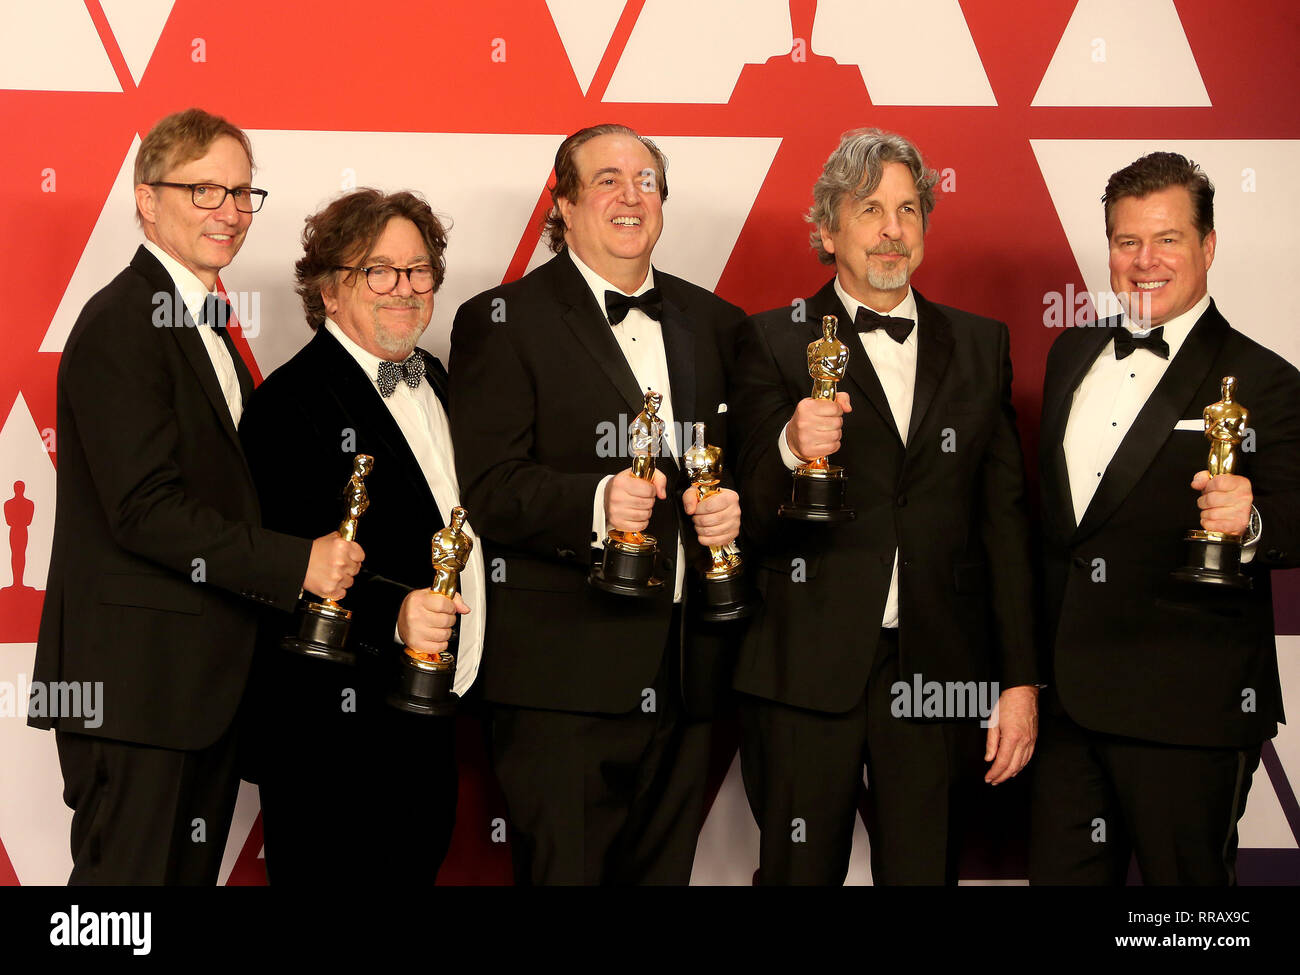 Hollywood, California, USA. 24th Feb, 2019. 24 February 2019 - Hollywood, California - Jim Burke, Charles B. Wessler, Nick Vallelonga, Peter Farrelly, Brian Currie. 91st Annual Academy Awards presented by the Academy of Motion Picture Arts and Sciences held at Hollywood & Highland Center. Photo Credit: Faye Sadou/AdMedia Credit: Faye Sadou/AdMedia/ZUMA Wire/Alamy Live News Stock Photo